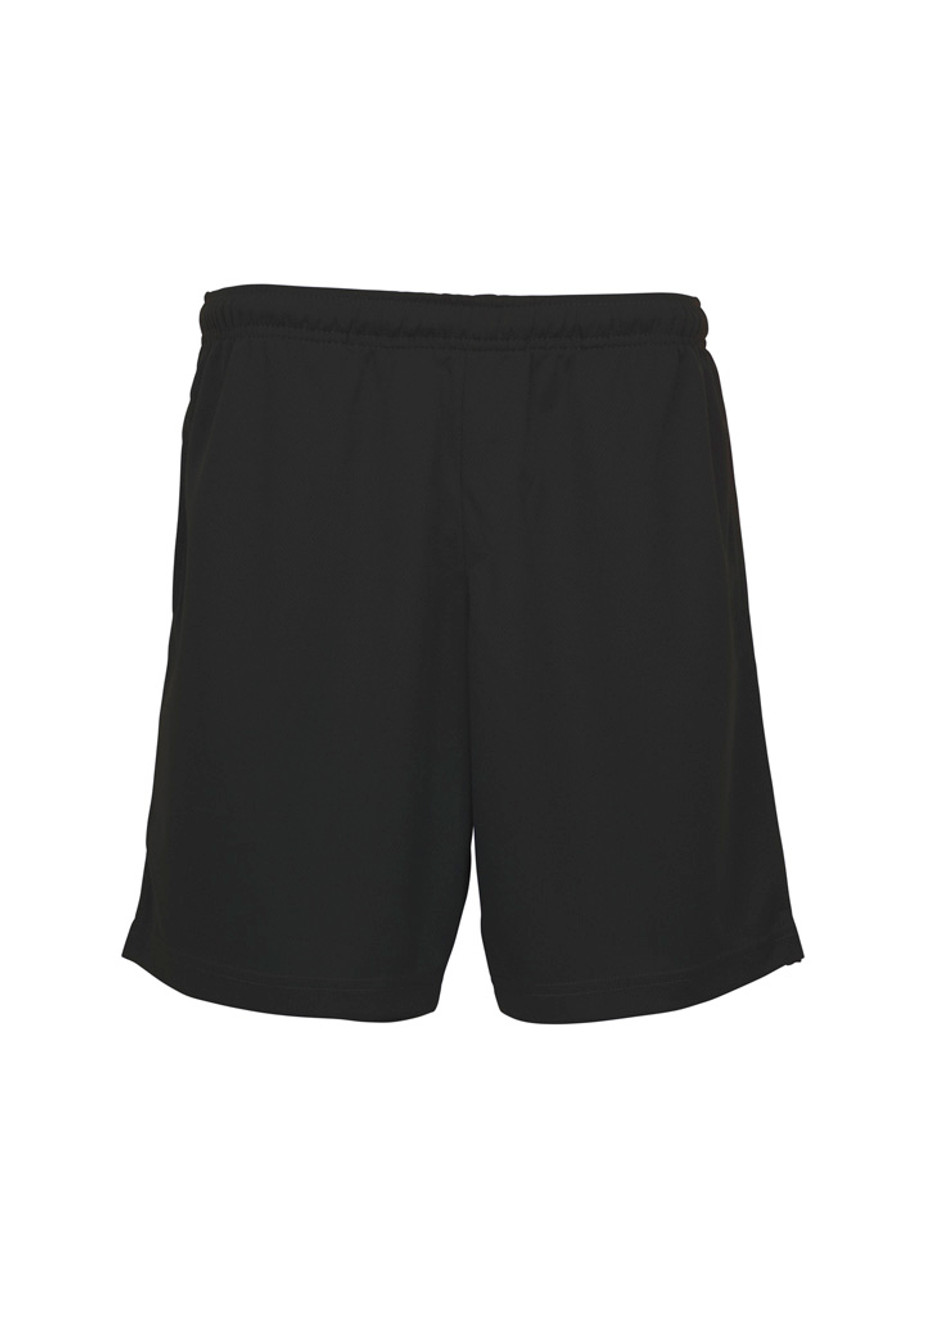 Biz Collection ST2020B Kids Cool Shorts | Available Colours: Navy, Forest, Black